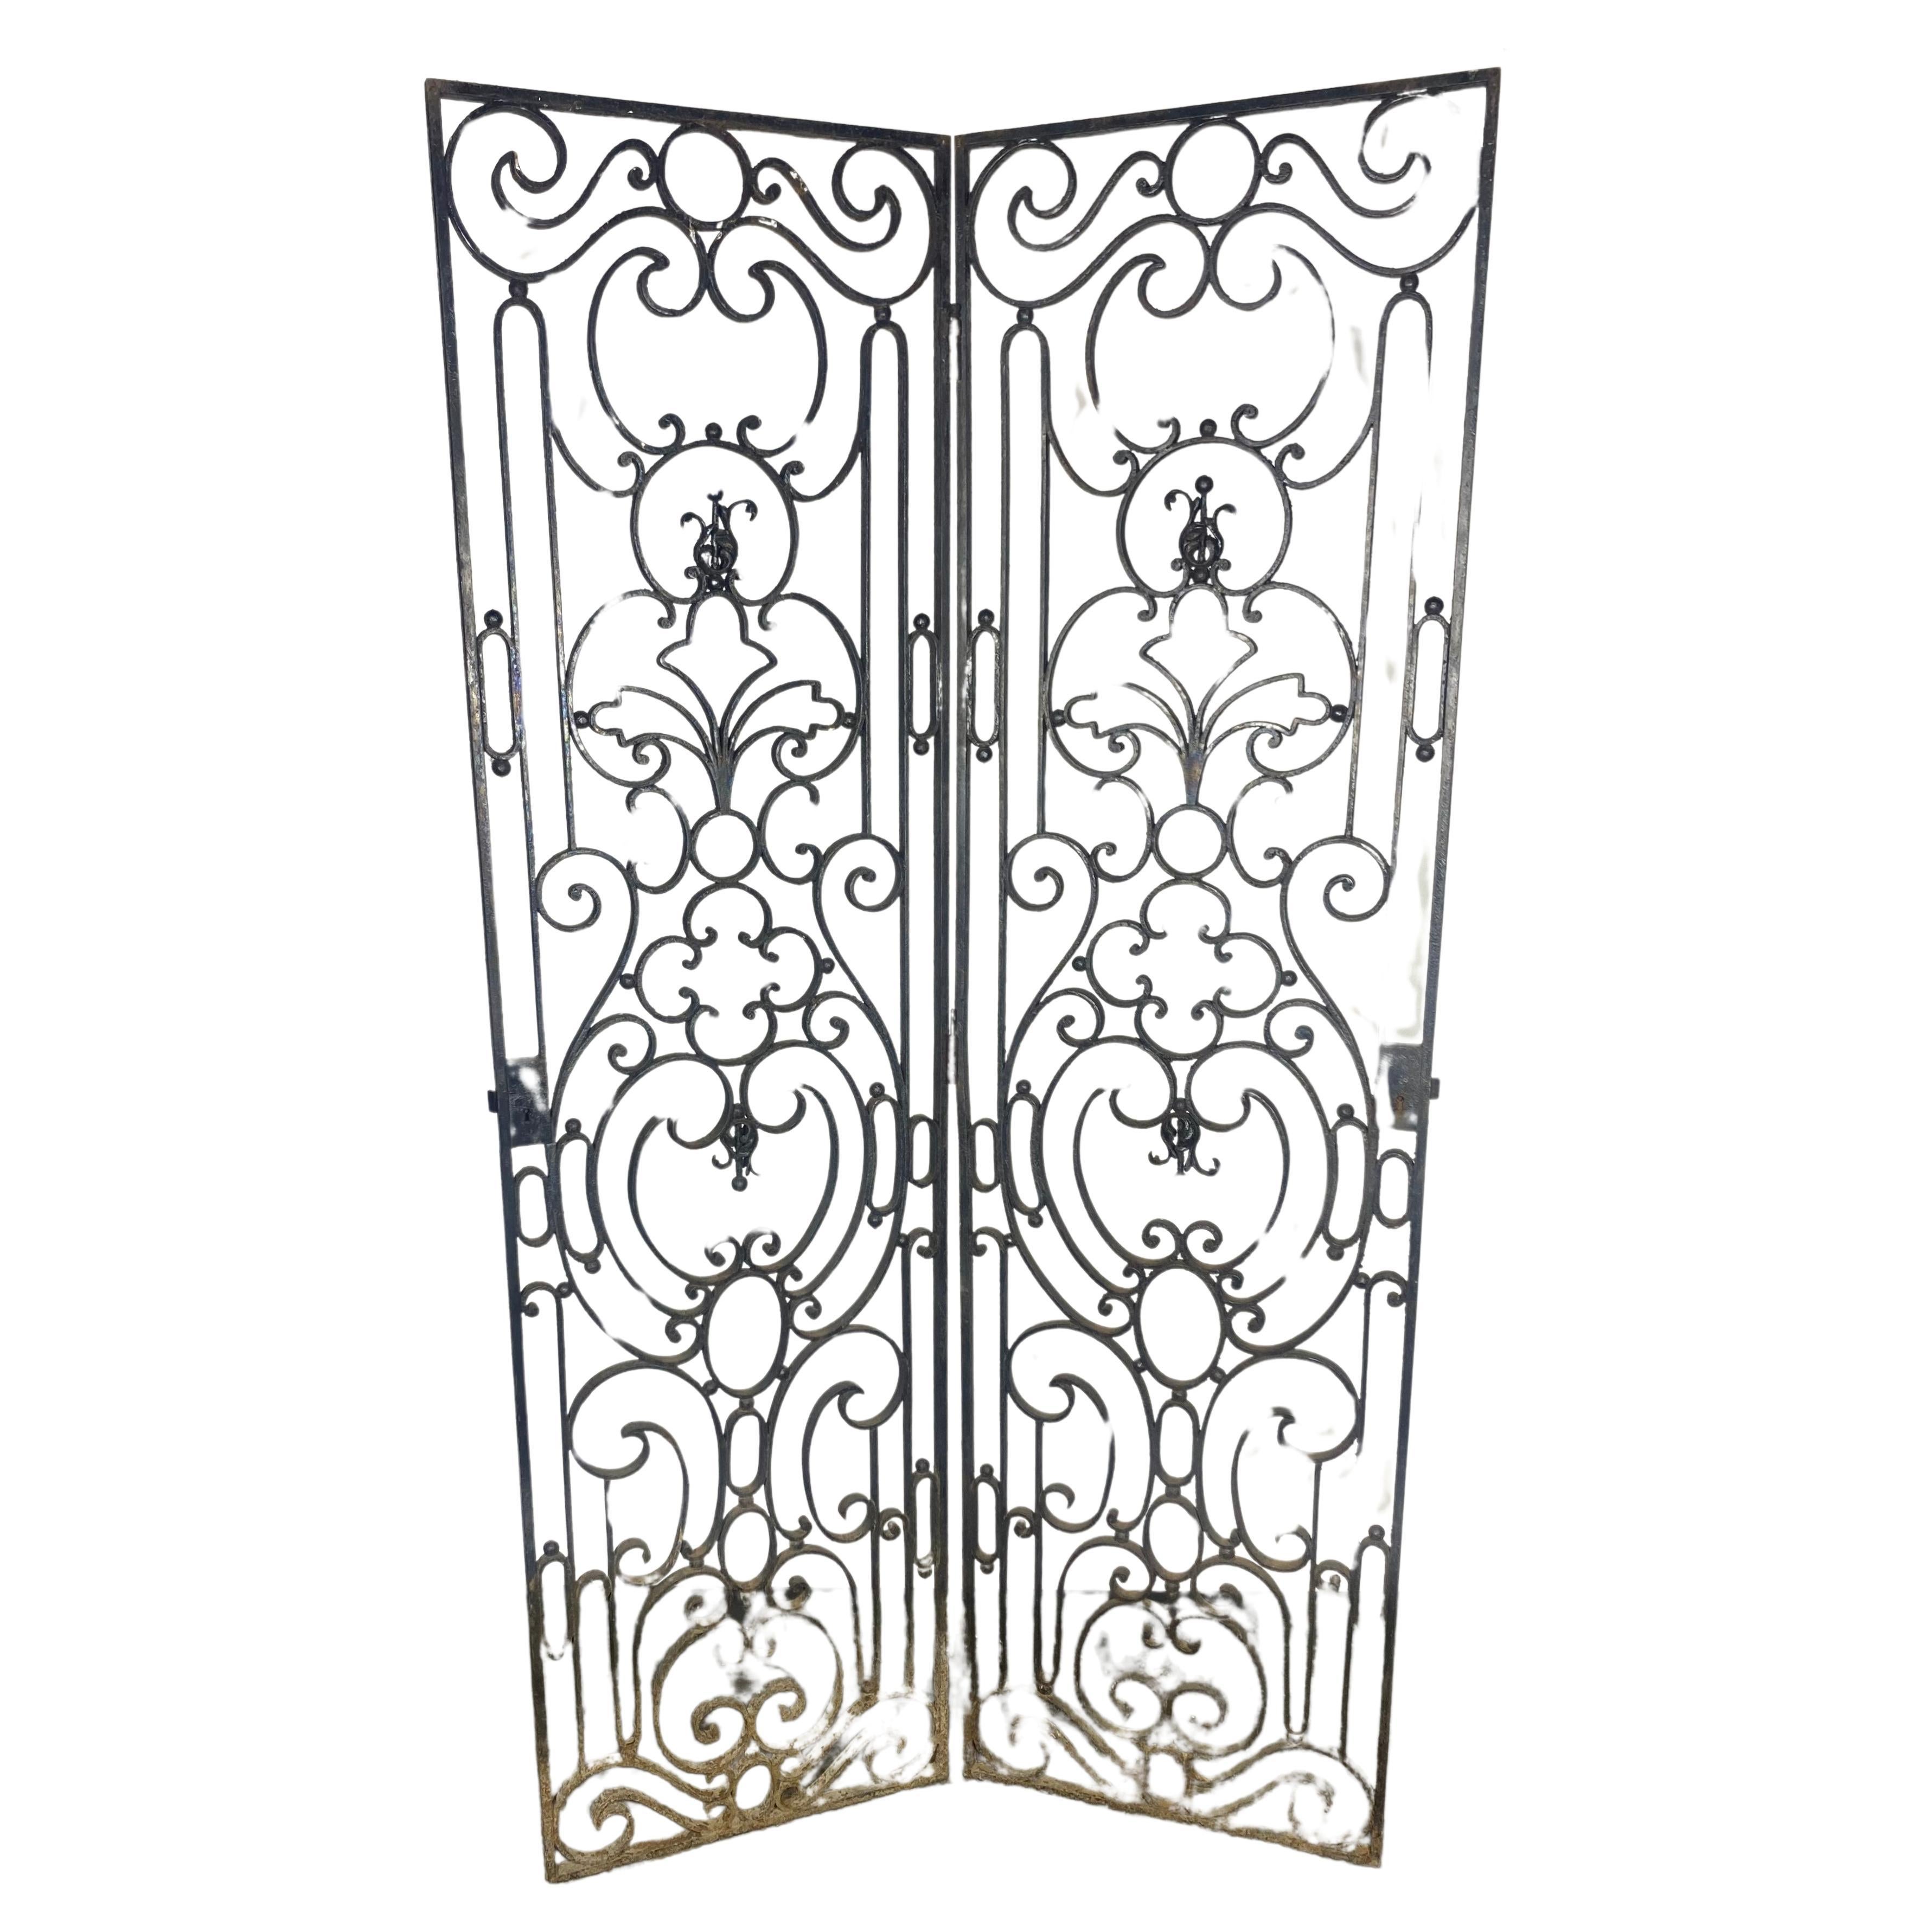 Lovely Hand Forged Wrought Iron Filigree Screen Room Divider, Garden element For Sale